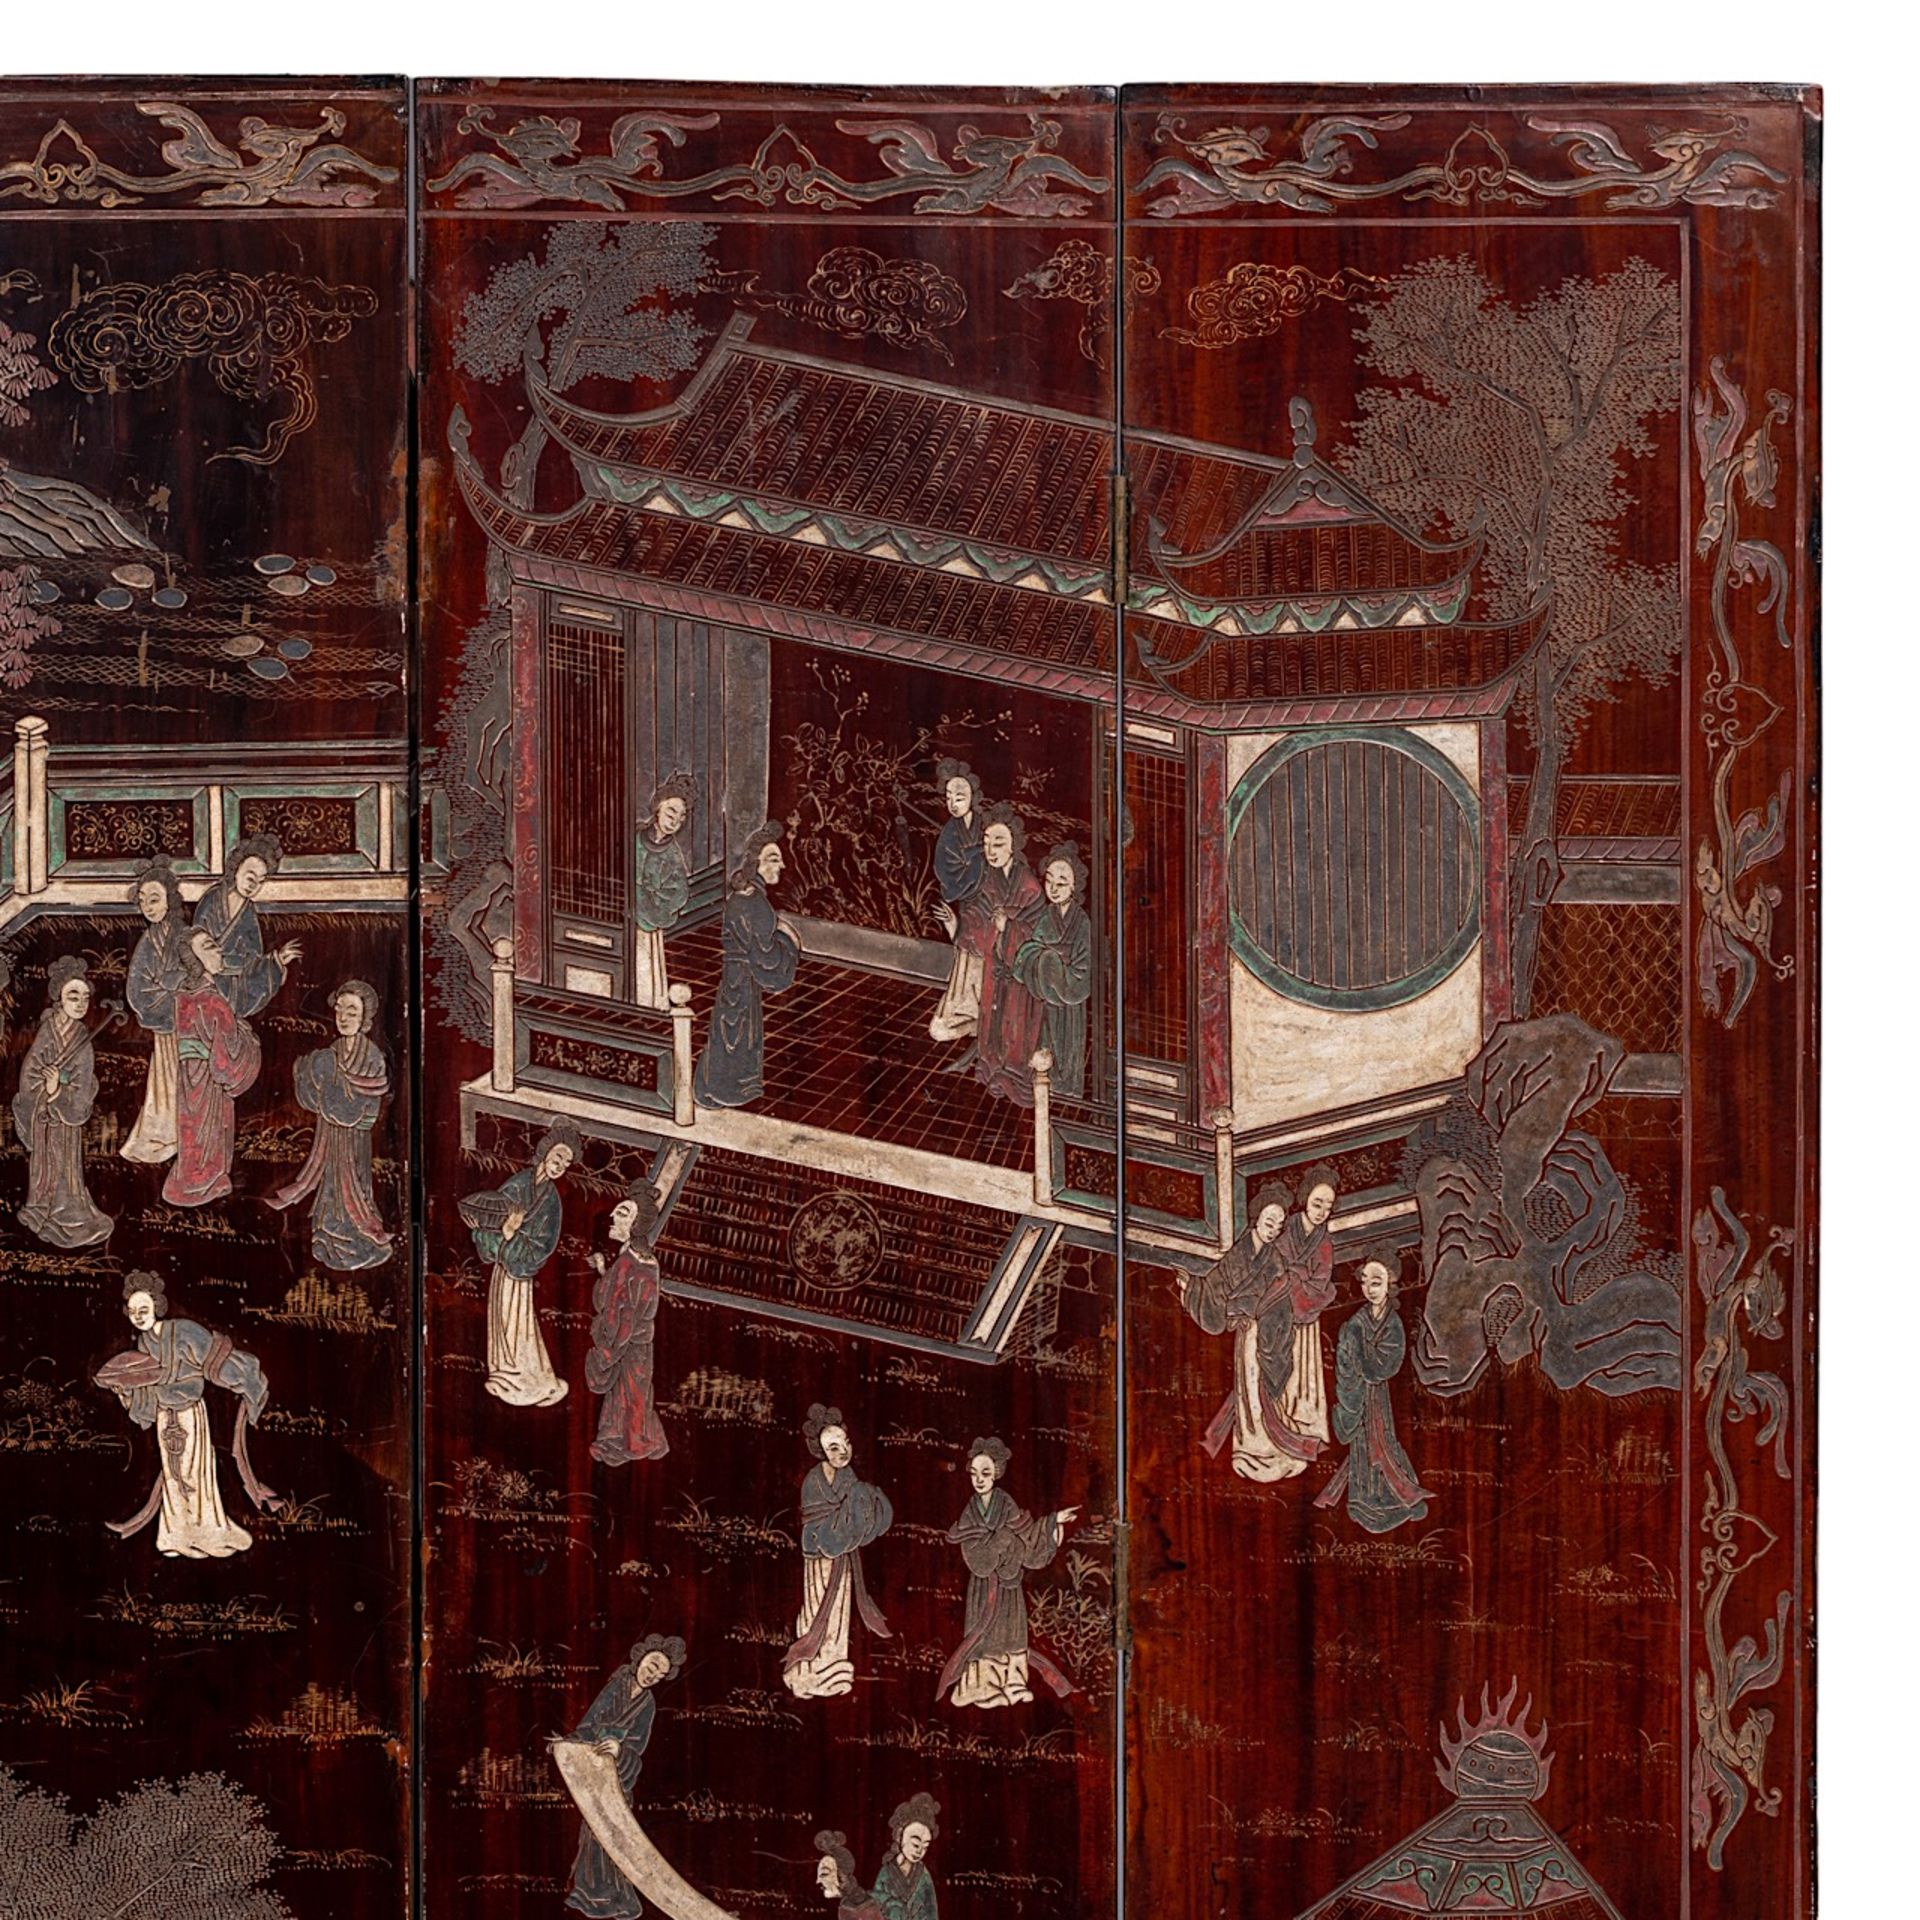 A Chinese coromandel lacquered four-panel chamber screen, late 18thC/19thC, H 162 - W 35,5 (each pan - Image 7 of 10